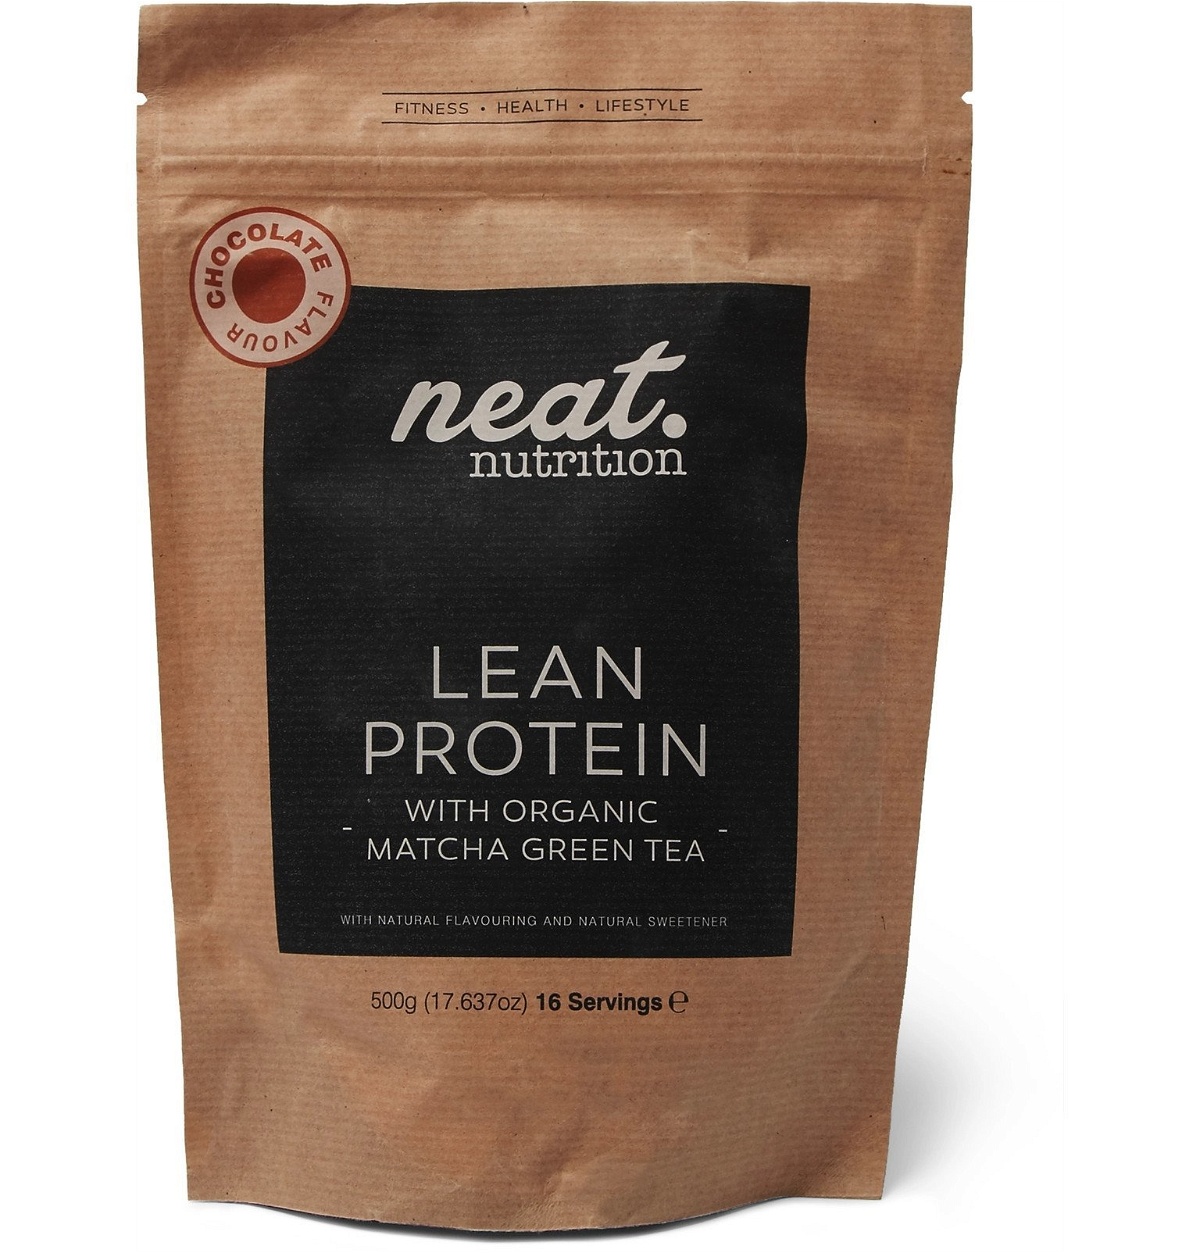 Photo: Neat Nutrition - Lean Protein - Chocolate Flavour, 500g - Colorless